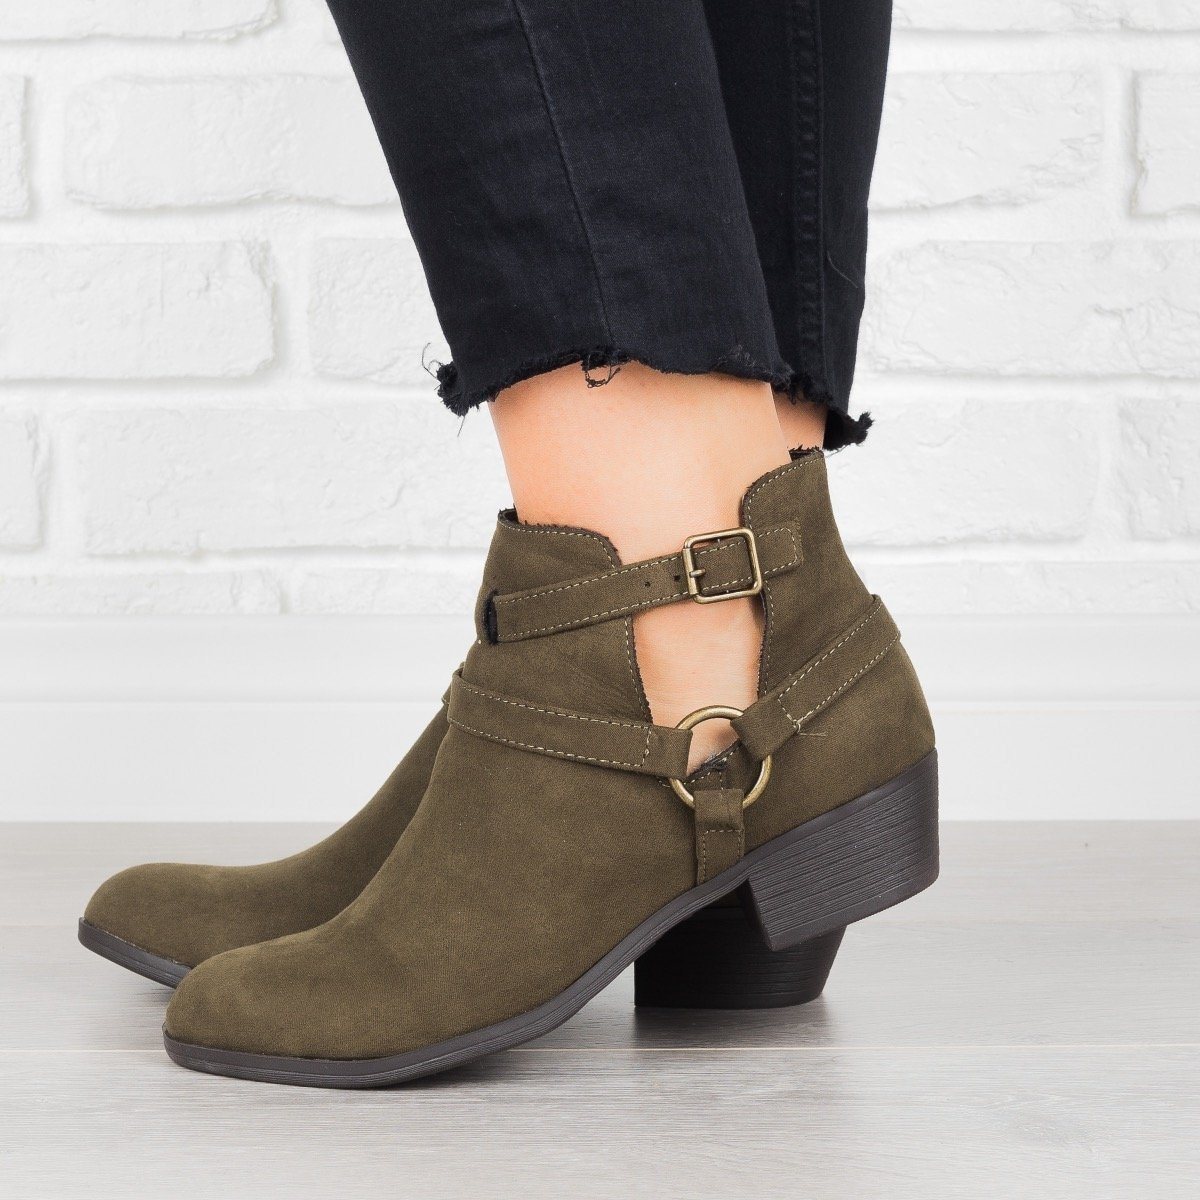 Cut-Out Buckled Booties - Shoelala 